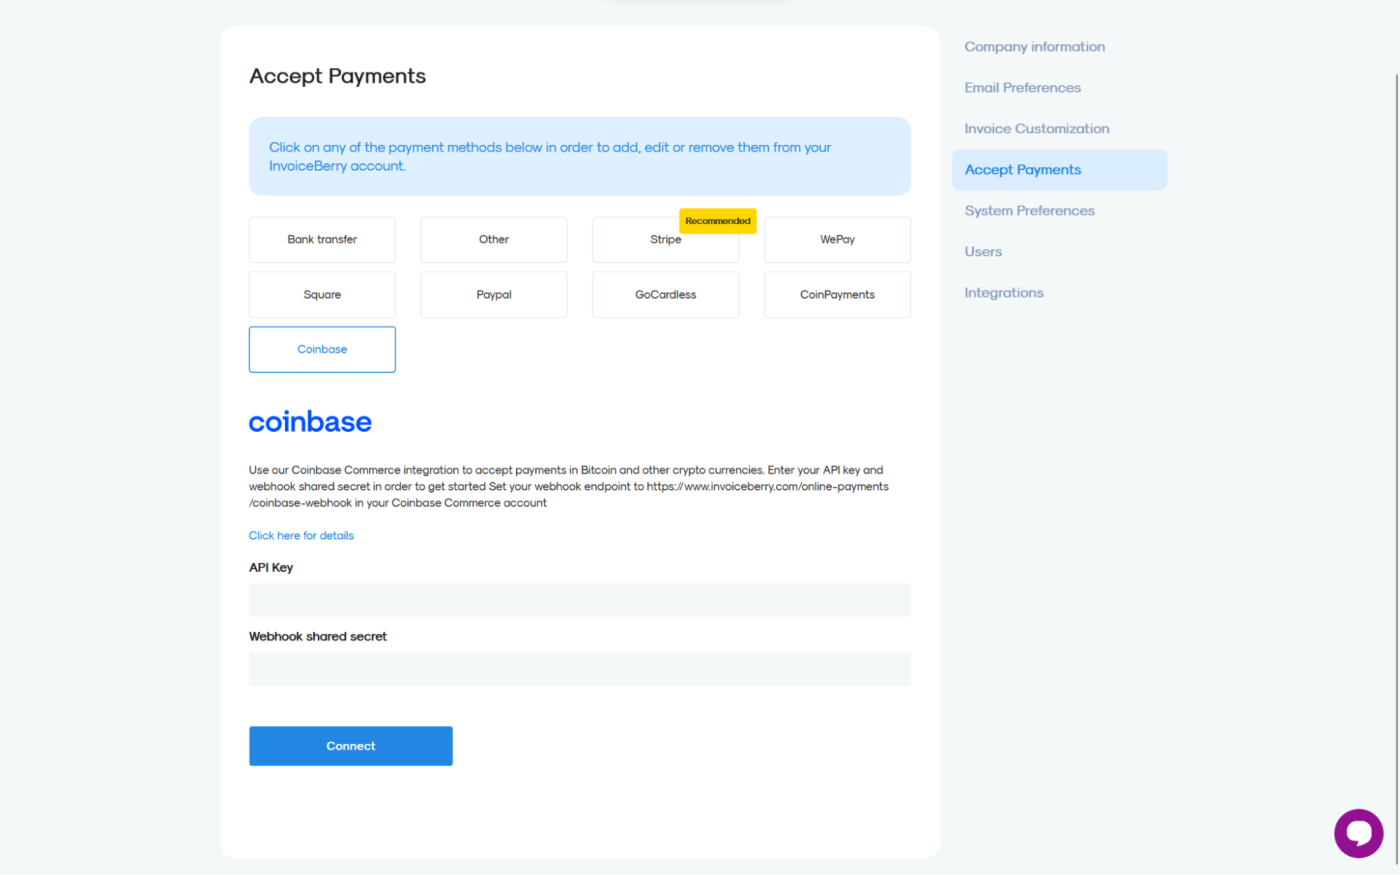 InvoiceBerry, our pick for the best invoice app for invoicing in crypto